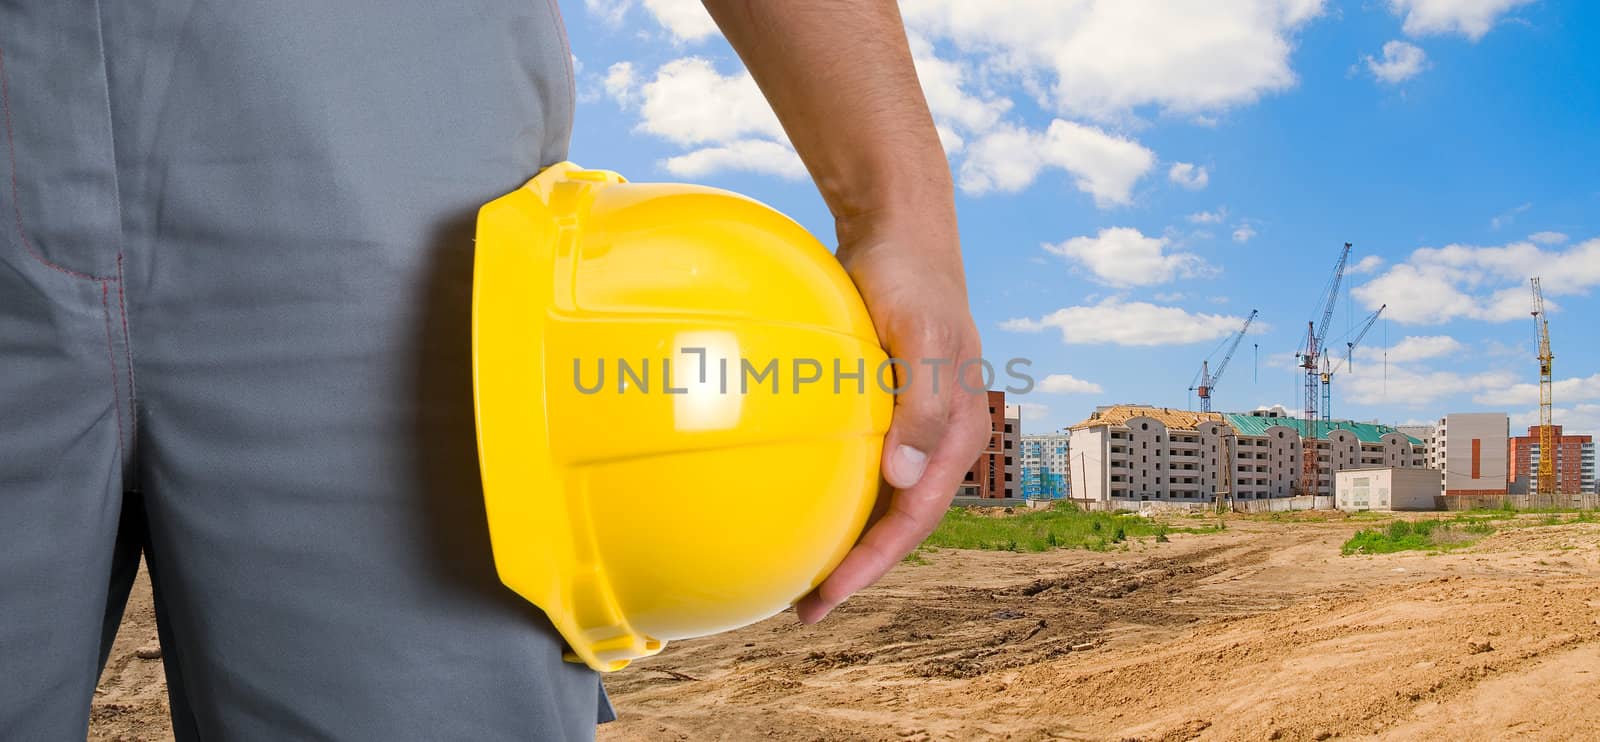 Closeup  of yellow helmet at builder hands on building background